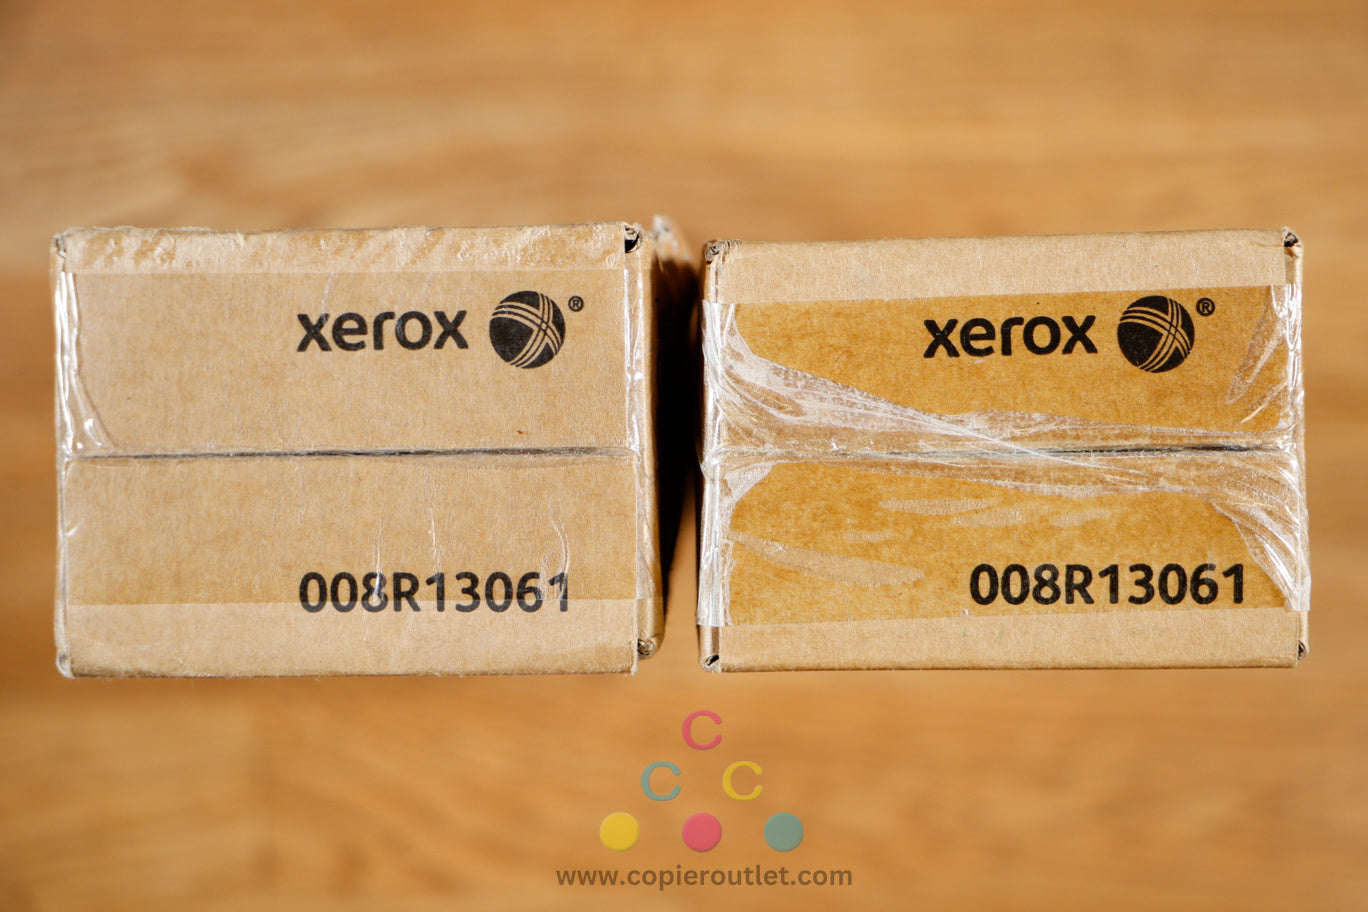 Lot of 2 Cosmetic Genuine Xerox Waste Toner Containers WC 7425 7428 7435 8R13061